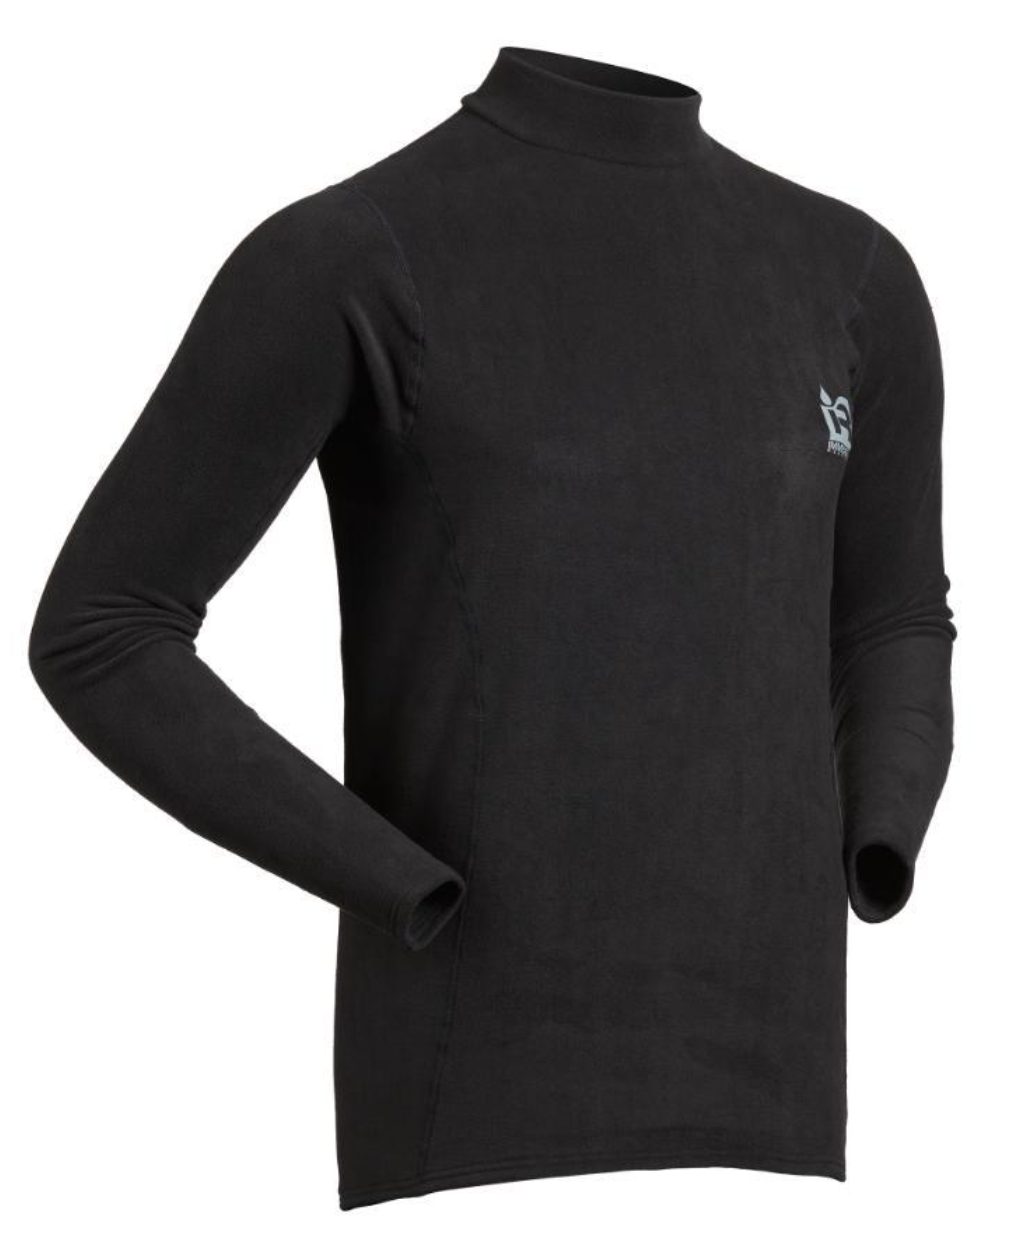 Immersion Research Mens Long Sleeve Thick Skin